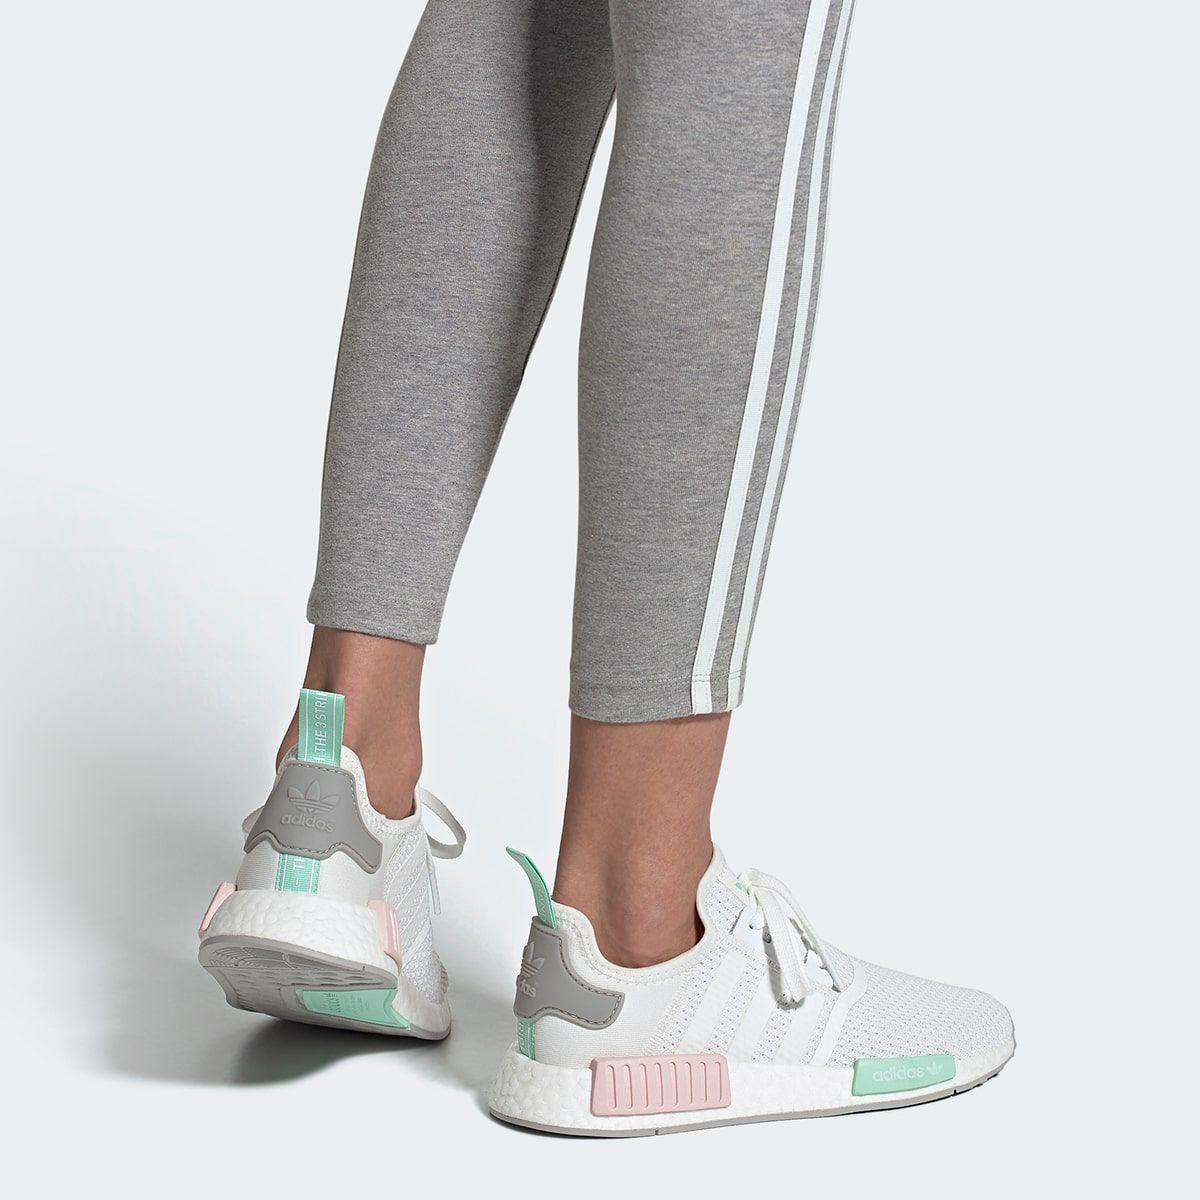 adidas nmd r1 cloud white grey two